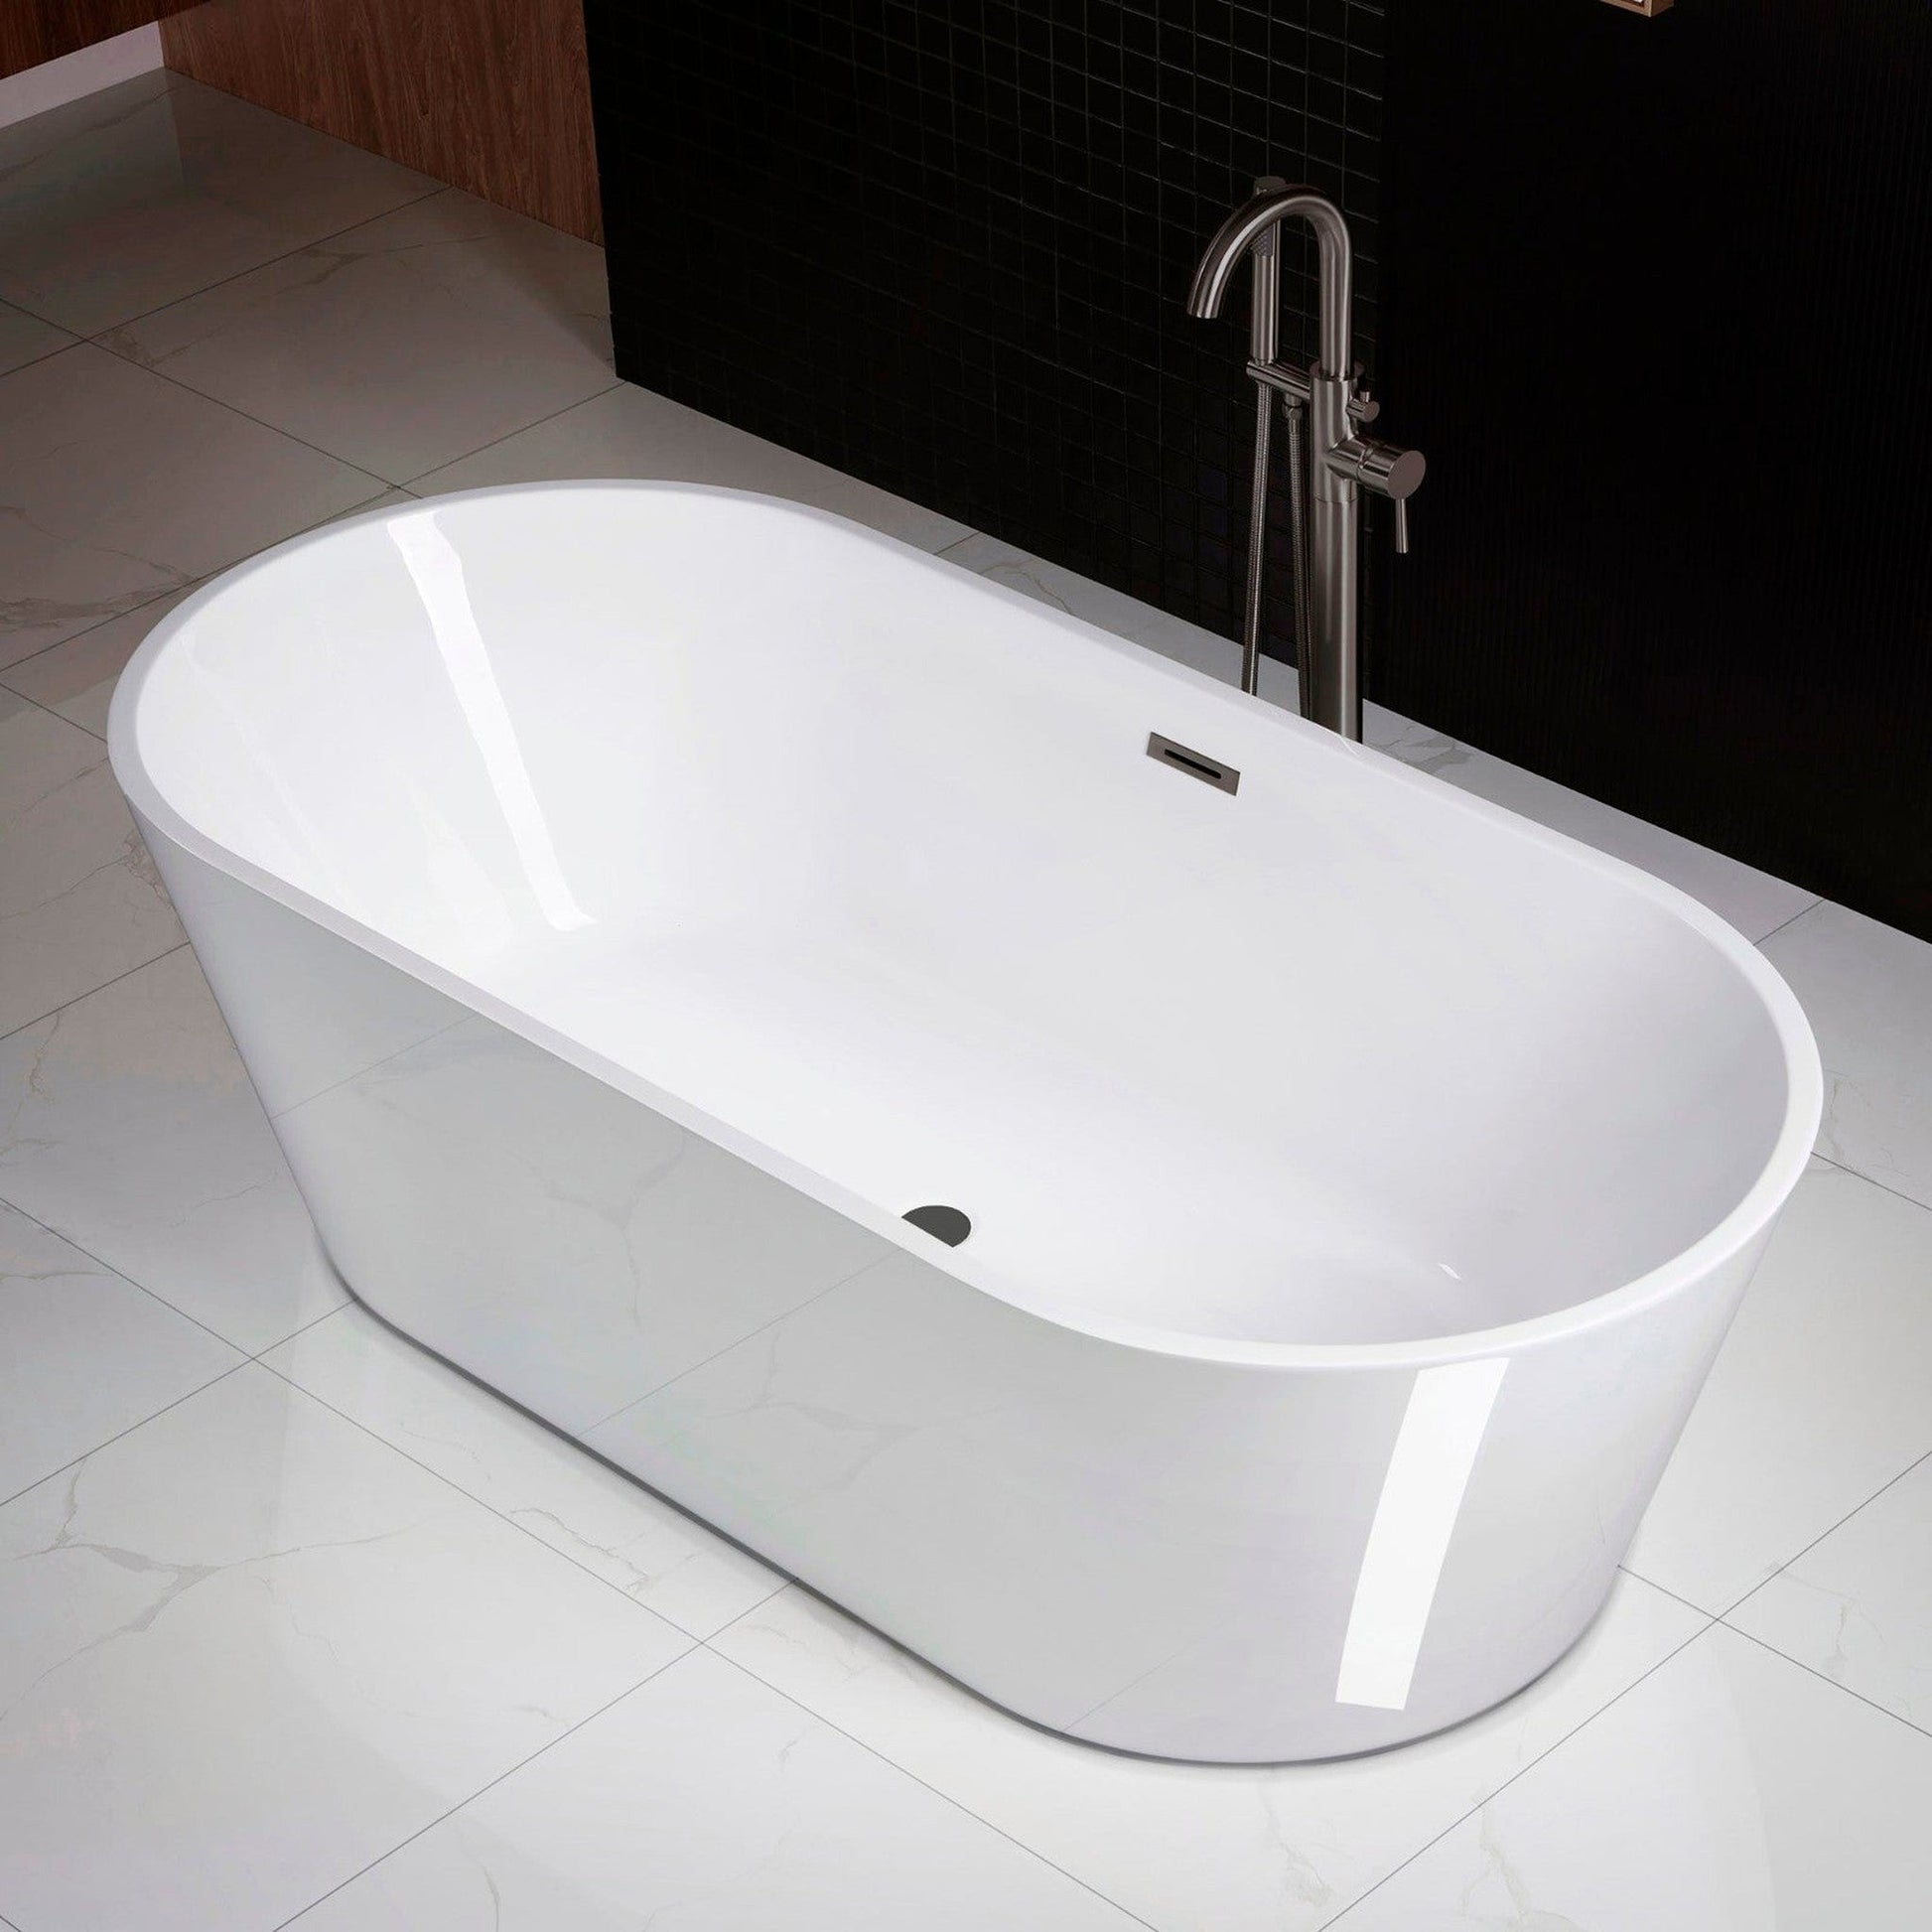 WoodBridge 71" White Acrylic Freestanding Contemporary Soaking Bathtub With Matte Black Drain, Overflow, F0072MBDR Tub Filler and Caddy Tray